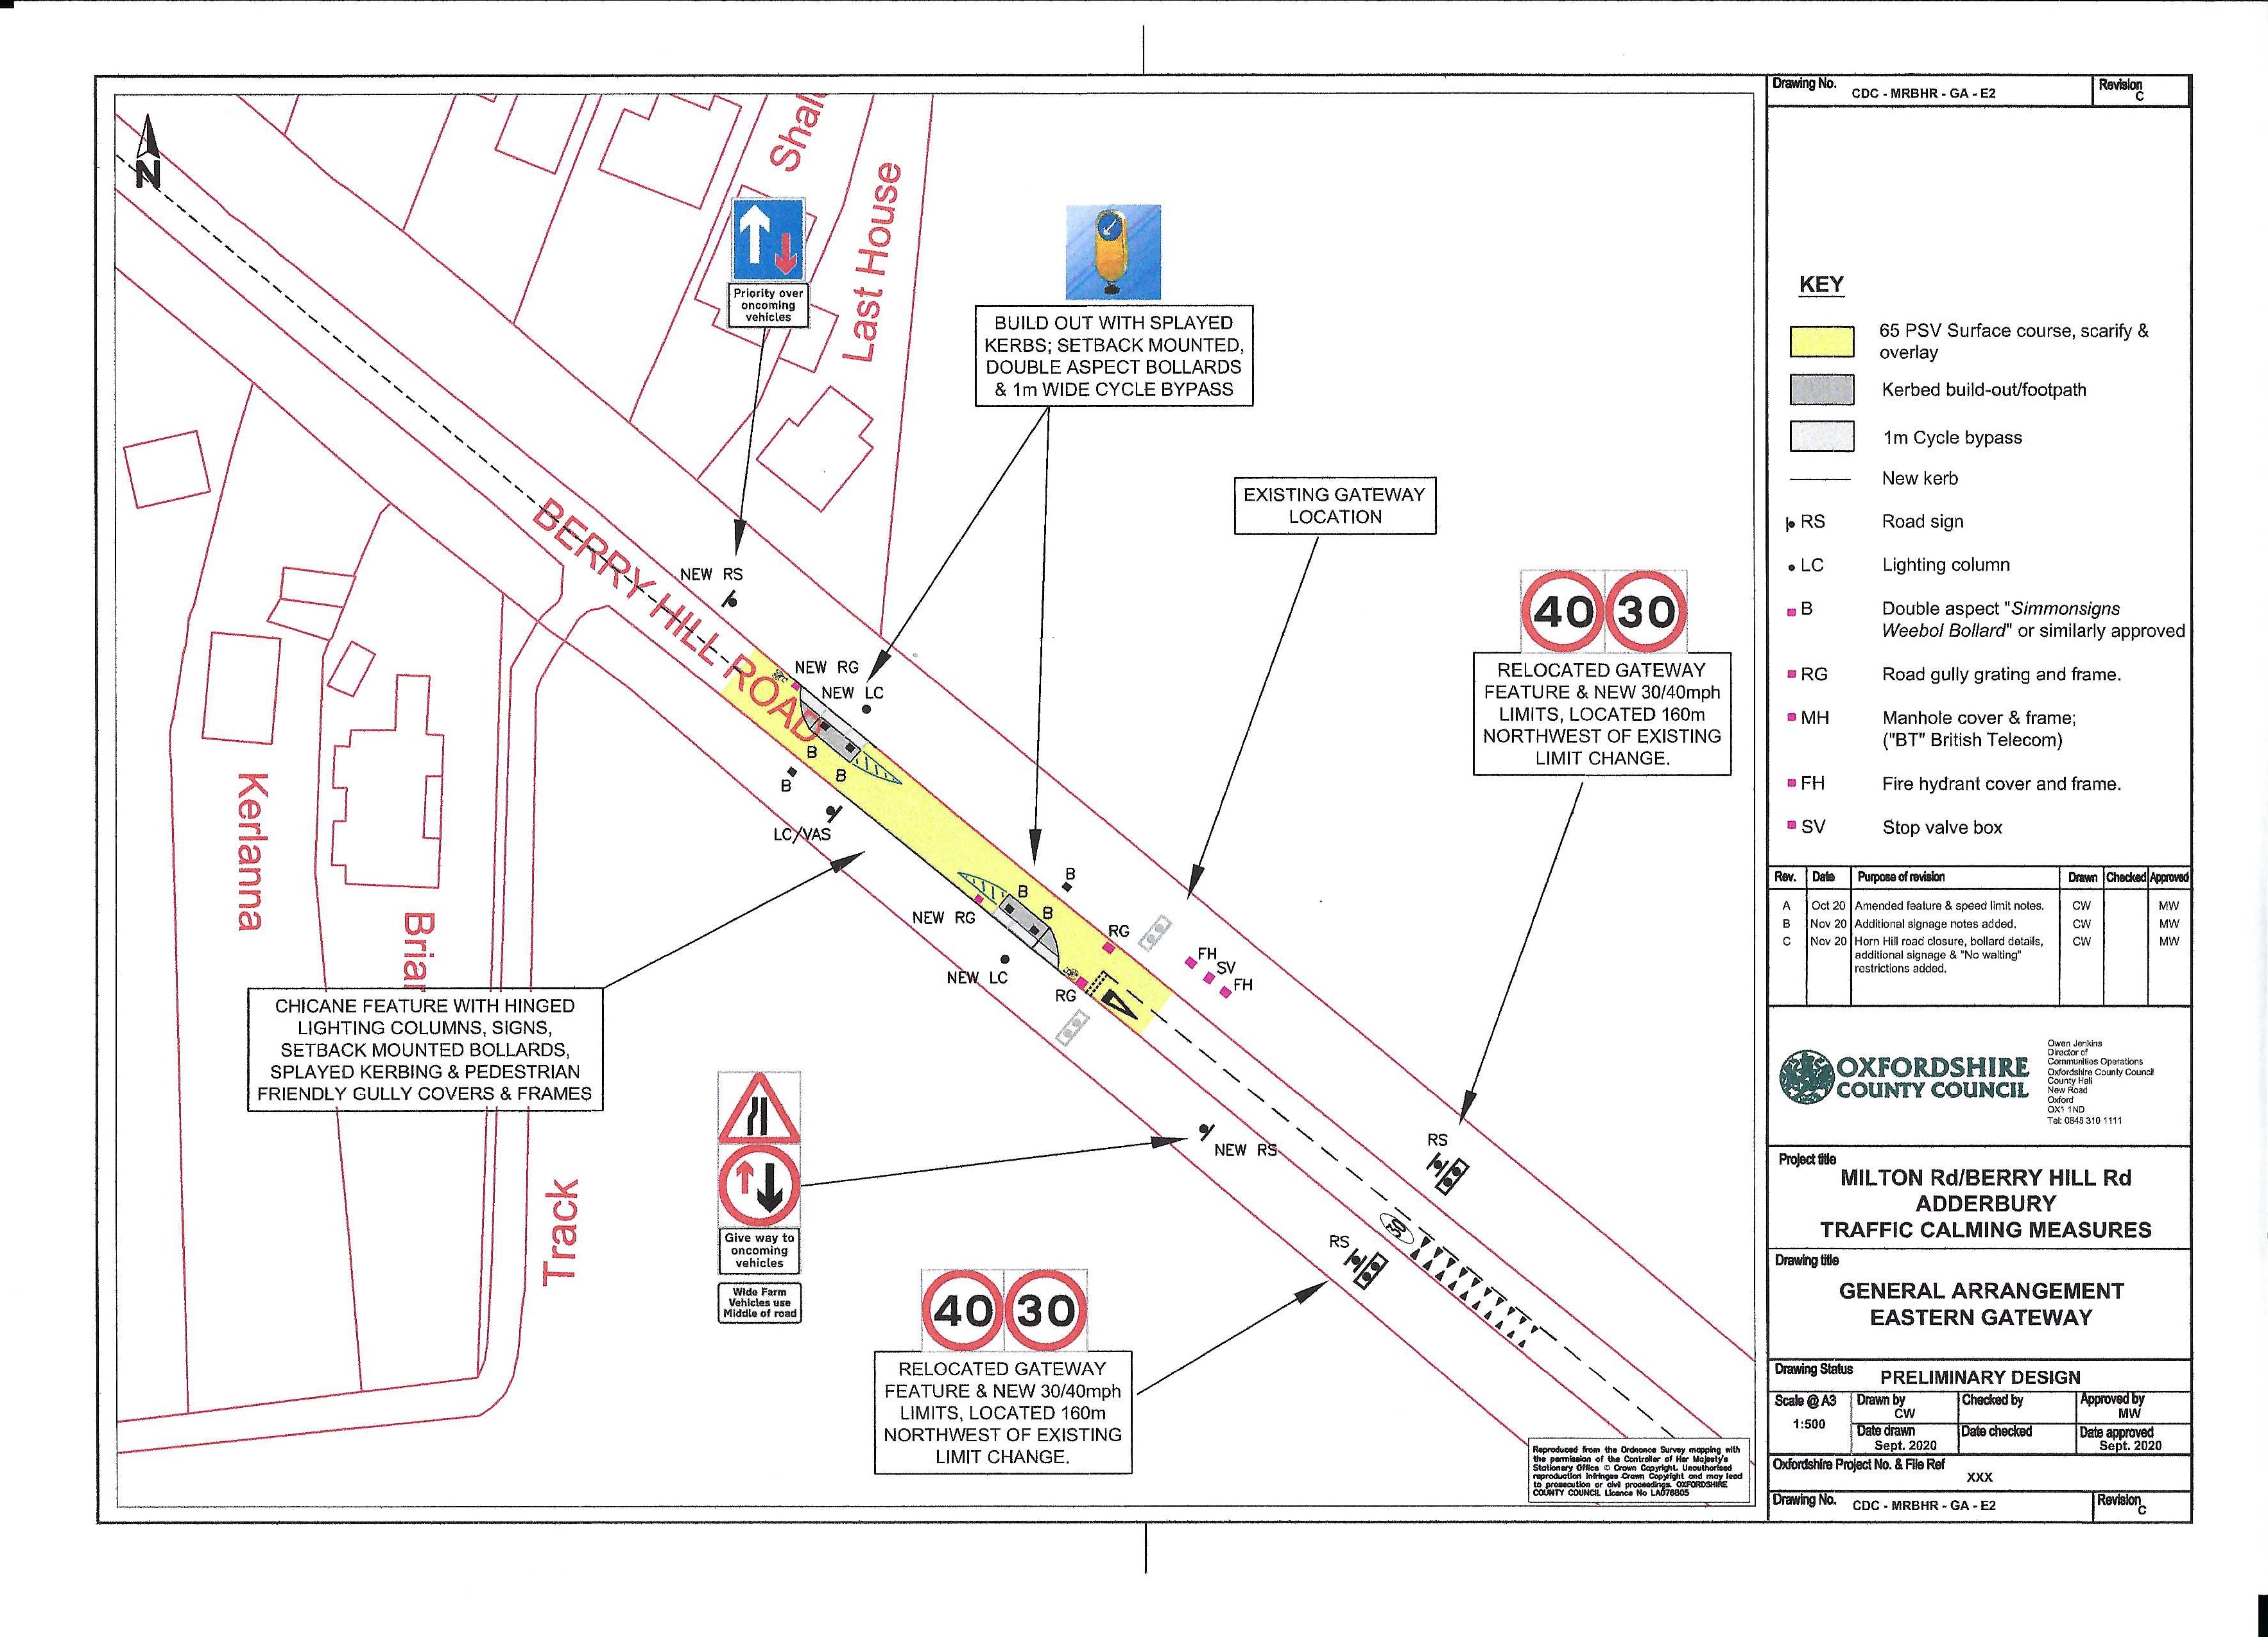 images/news/berry hill road chiance positioning plan April 2021.jpg